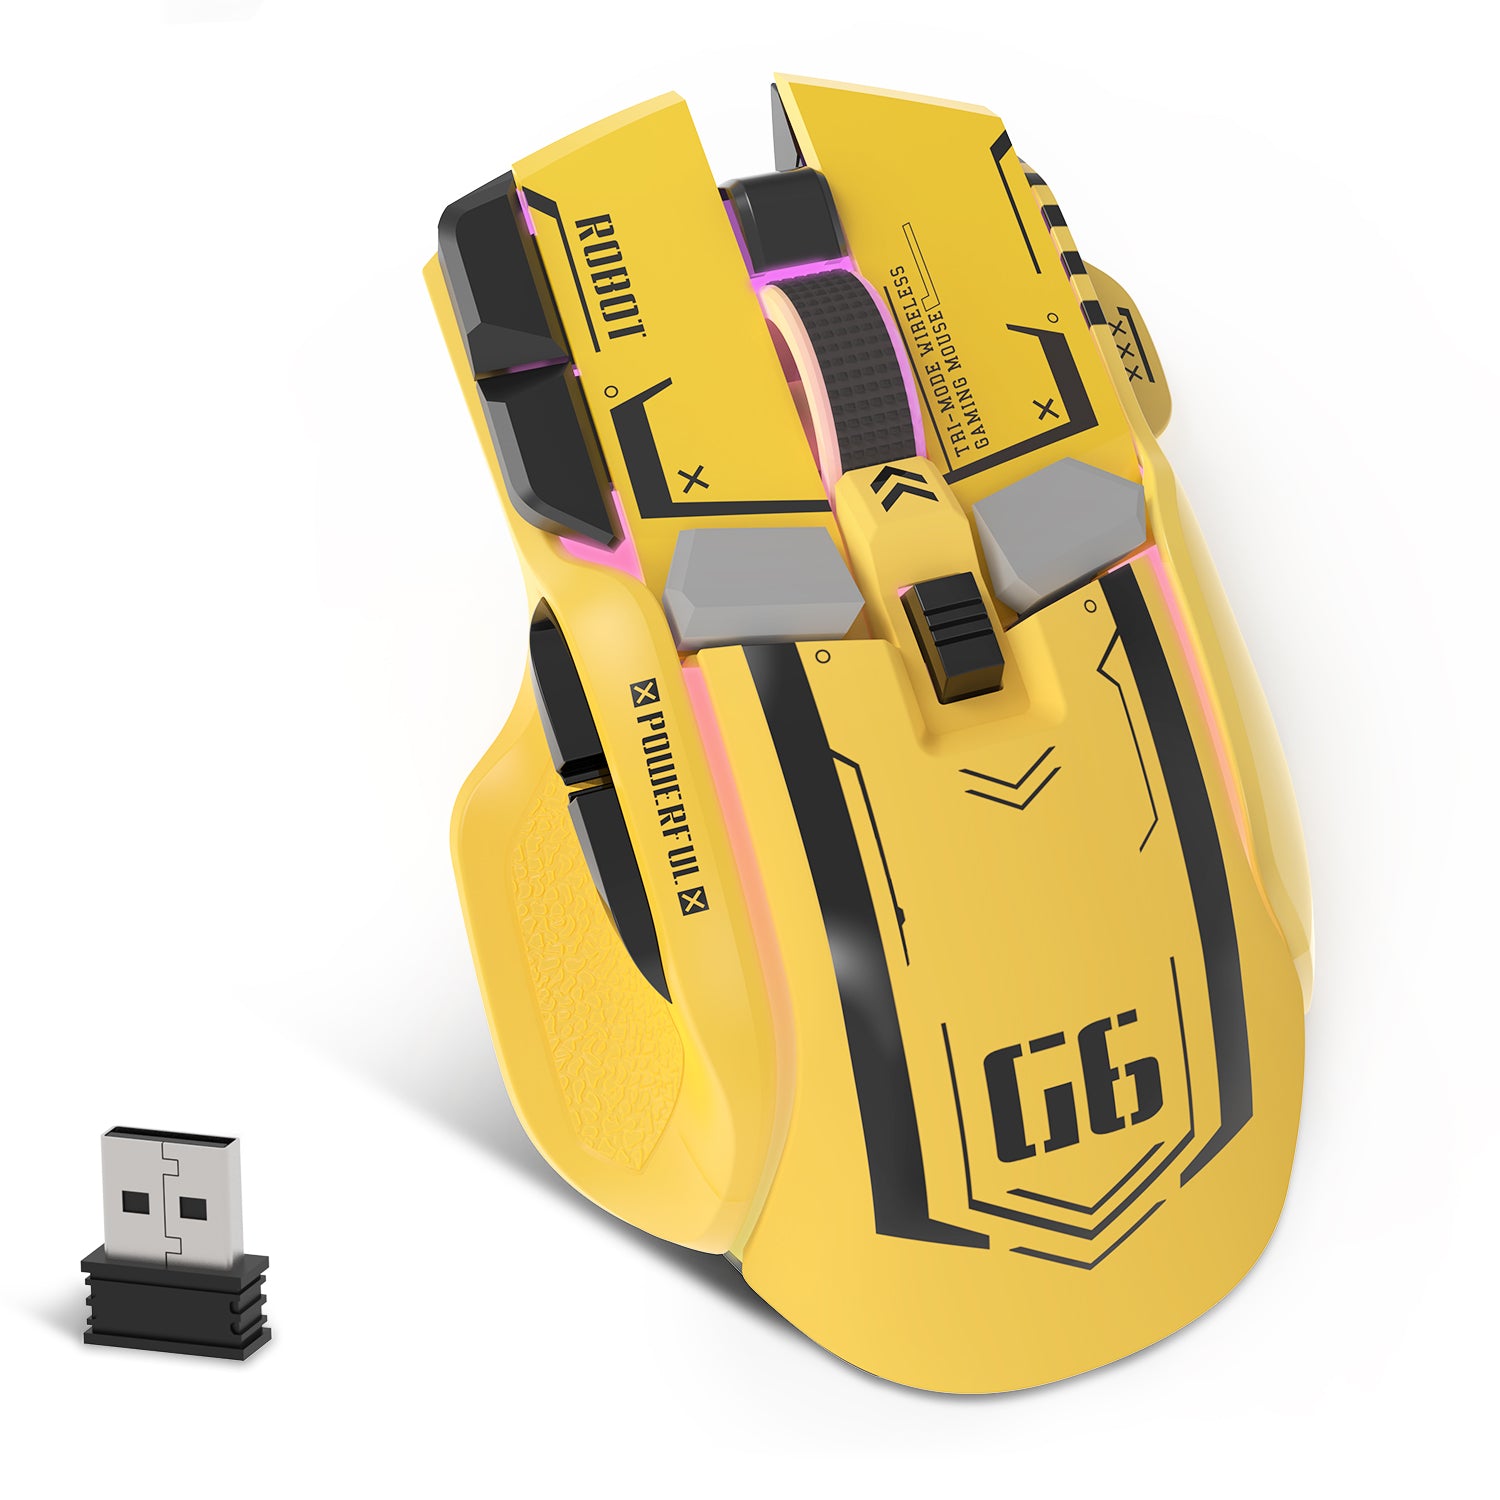 KUIYN G6 Tri Mode Mouse, Type-C Wired 2.4G Wireless Bluetooth Mouse with 11  RGB Backlit, Mechanical Gaming Mouse with 10 Buttons & Fire Button